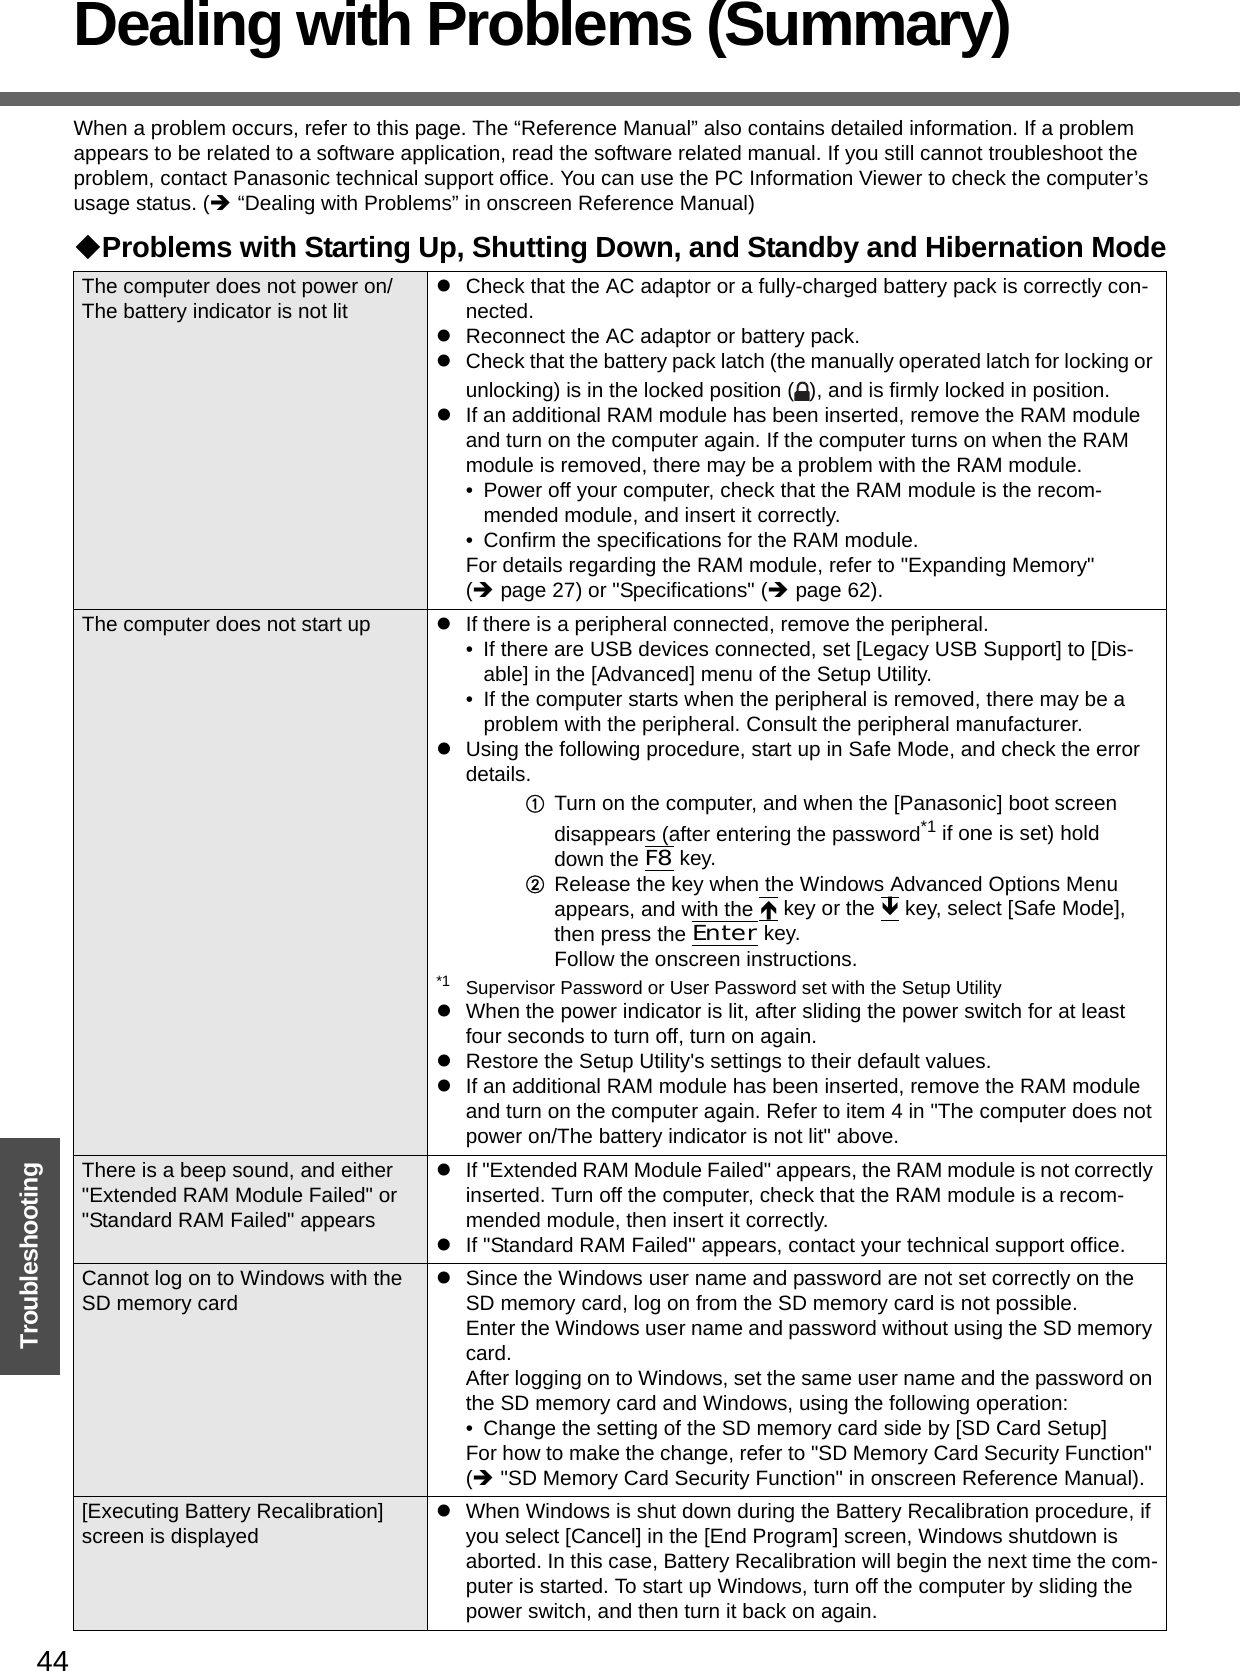 44TroubleshootingDealing with Problems (Summary)When a problem occurs, refer to this page. The “Reference Manual” also contains detailed information. If a problem appears to be related to a software application, read the software related manual. If you still cannot troubleshoot the problem, contact Panasonic technical support office. You can use the PC Information Viewer to check the computer’s usage status. (Î “Dealing with Problems” in onscreen Reference Manual)Problems with Starting Up, Shutting Down, and Standby and Hibernation ModeThe computer does not power on/The battery indicator is not litzCheck that the AC adaptor or a fully-charged battery pack is correctly con-nected.zReconnect the AC adaptor or battery pack.zCheck that the battery pack latch (the manually operated latch for locking or unlocking) is in the locked position ( ), and is firmly locked in position.zIf an additional RAM module has been inserted, remove the RAM module and turn on the computer again. If the computer turns on when the RAM module is removed, there may be a problem with the RAM module. • Power off your computer, check that the RAM module is the recom-mended module, and insert it correctly. • Confirm the specifications for the RAM module.For details regarding the RAM module, refer to &quot;Expanding Memory&quot; (Îpage 27) or &quot;Specifications&quot; (Îpage 62). The computer does not start up zIf there is a peripheral connected, remove the peripheral.• If there are USB devices connected, set [Legacy USB Support] to [Dis-able] in the [Advanced] menu of the Setup Utility. • If the computer starts when the peripheral is removed, there may be a problem with the peripheral. Consult the peripheral manufacturer.zUsing the following procedure, start up in Safe Mode, and check the error details.ATurn on the computer, and when the [Panasonic] boot screen disappears (after entering the password*1 if one is set) hold down the F8 key.BRelease the key when the Windows Advanced Options Menu appears, and with the Ï key or the Ð key, select [Safe Mode], then press the Enter key.Follow the onscreen instructions.*1 Supervisor Password or User Password set with the Setup UtilityzWhen the power indicator is lit, after sliding the power switch for at least four seconds to turn off, turn on again.zRestore the Setup Utility&apos;s settings to their default values.zIf an additional RAM module has been inserted, remove the RAM module and turn on the computer again. Refer to item 4 in &quot;The computer does not power on/The battery indicator is not lit&quot; above.There is a beep sound, and either &quot;Extended RAM Module Failed&quot; or &quot;Standard RAM Failed&quot; appearszIf &quot;Extended RAM Module Failed&quot; appears, the RAM module is not correctly inserted. Turn off the computer, check that the RAM module is a recom-mended module, then insert it correctly.zIf &quot;Standard RAM Failed&quot; appears, contact your technical support office.Cannot log on to Windows with the SD memory cardzSince the Windows user name and password are not set correctly on the SD memory card, log on from the SD memory card is not possible.Enter the Windows user name and password without using the SD memory card.After logging on to Windows, set the same user name and the password on the SD memory card and Windows, using the following operation:• Change the setting of the SD memory card side by [SD Card Setup]For how to make the change, refer to &quot;SD Memory Card Security Function&quot; (Î &quot;SD Memory Card Security Function&quot; in onscreen Reference Manual).[Executing Battery Recalibration] screen is displayedzWhen Windows is shut down during the Battery Recalibration procedure, if you select [Cancel] in the [End Program] screen, Windows shutdown is aborted. In this case, Battery Recalibration will begin the next time the com-puter is started. To start up Windows, turn off the computer by sliding the power switch, and then turn it back on again.